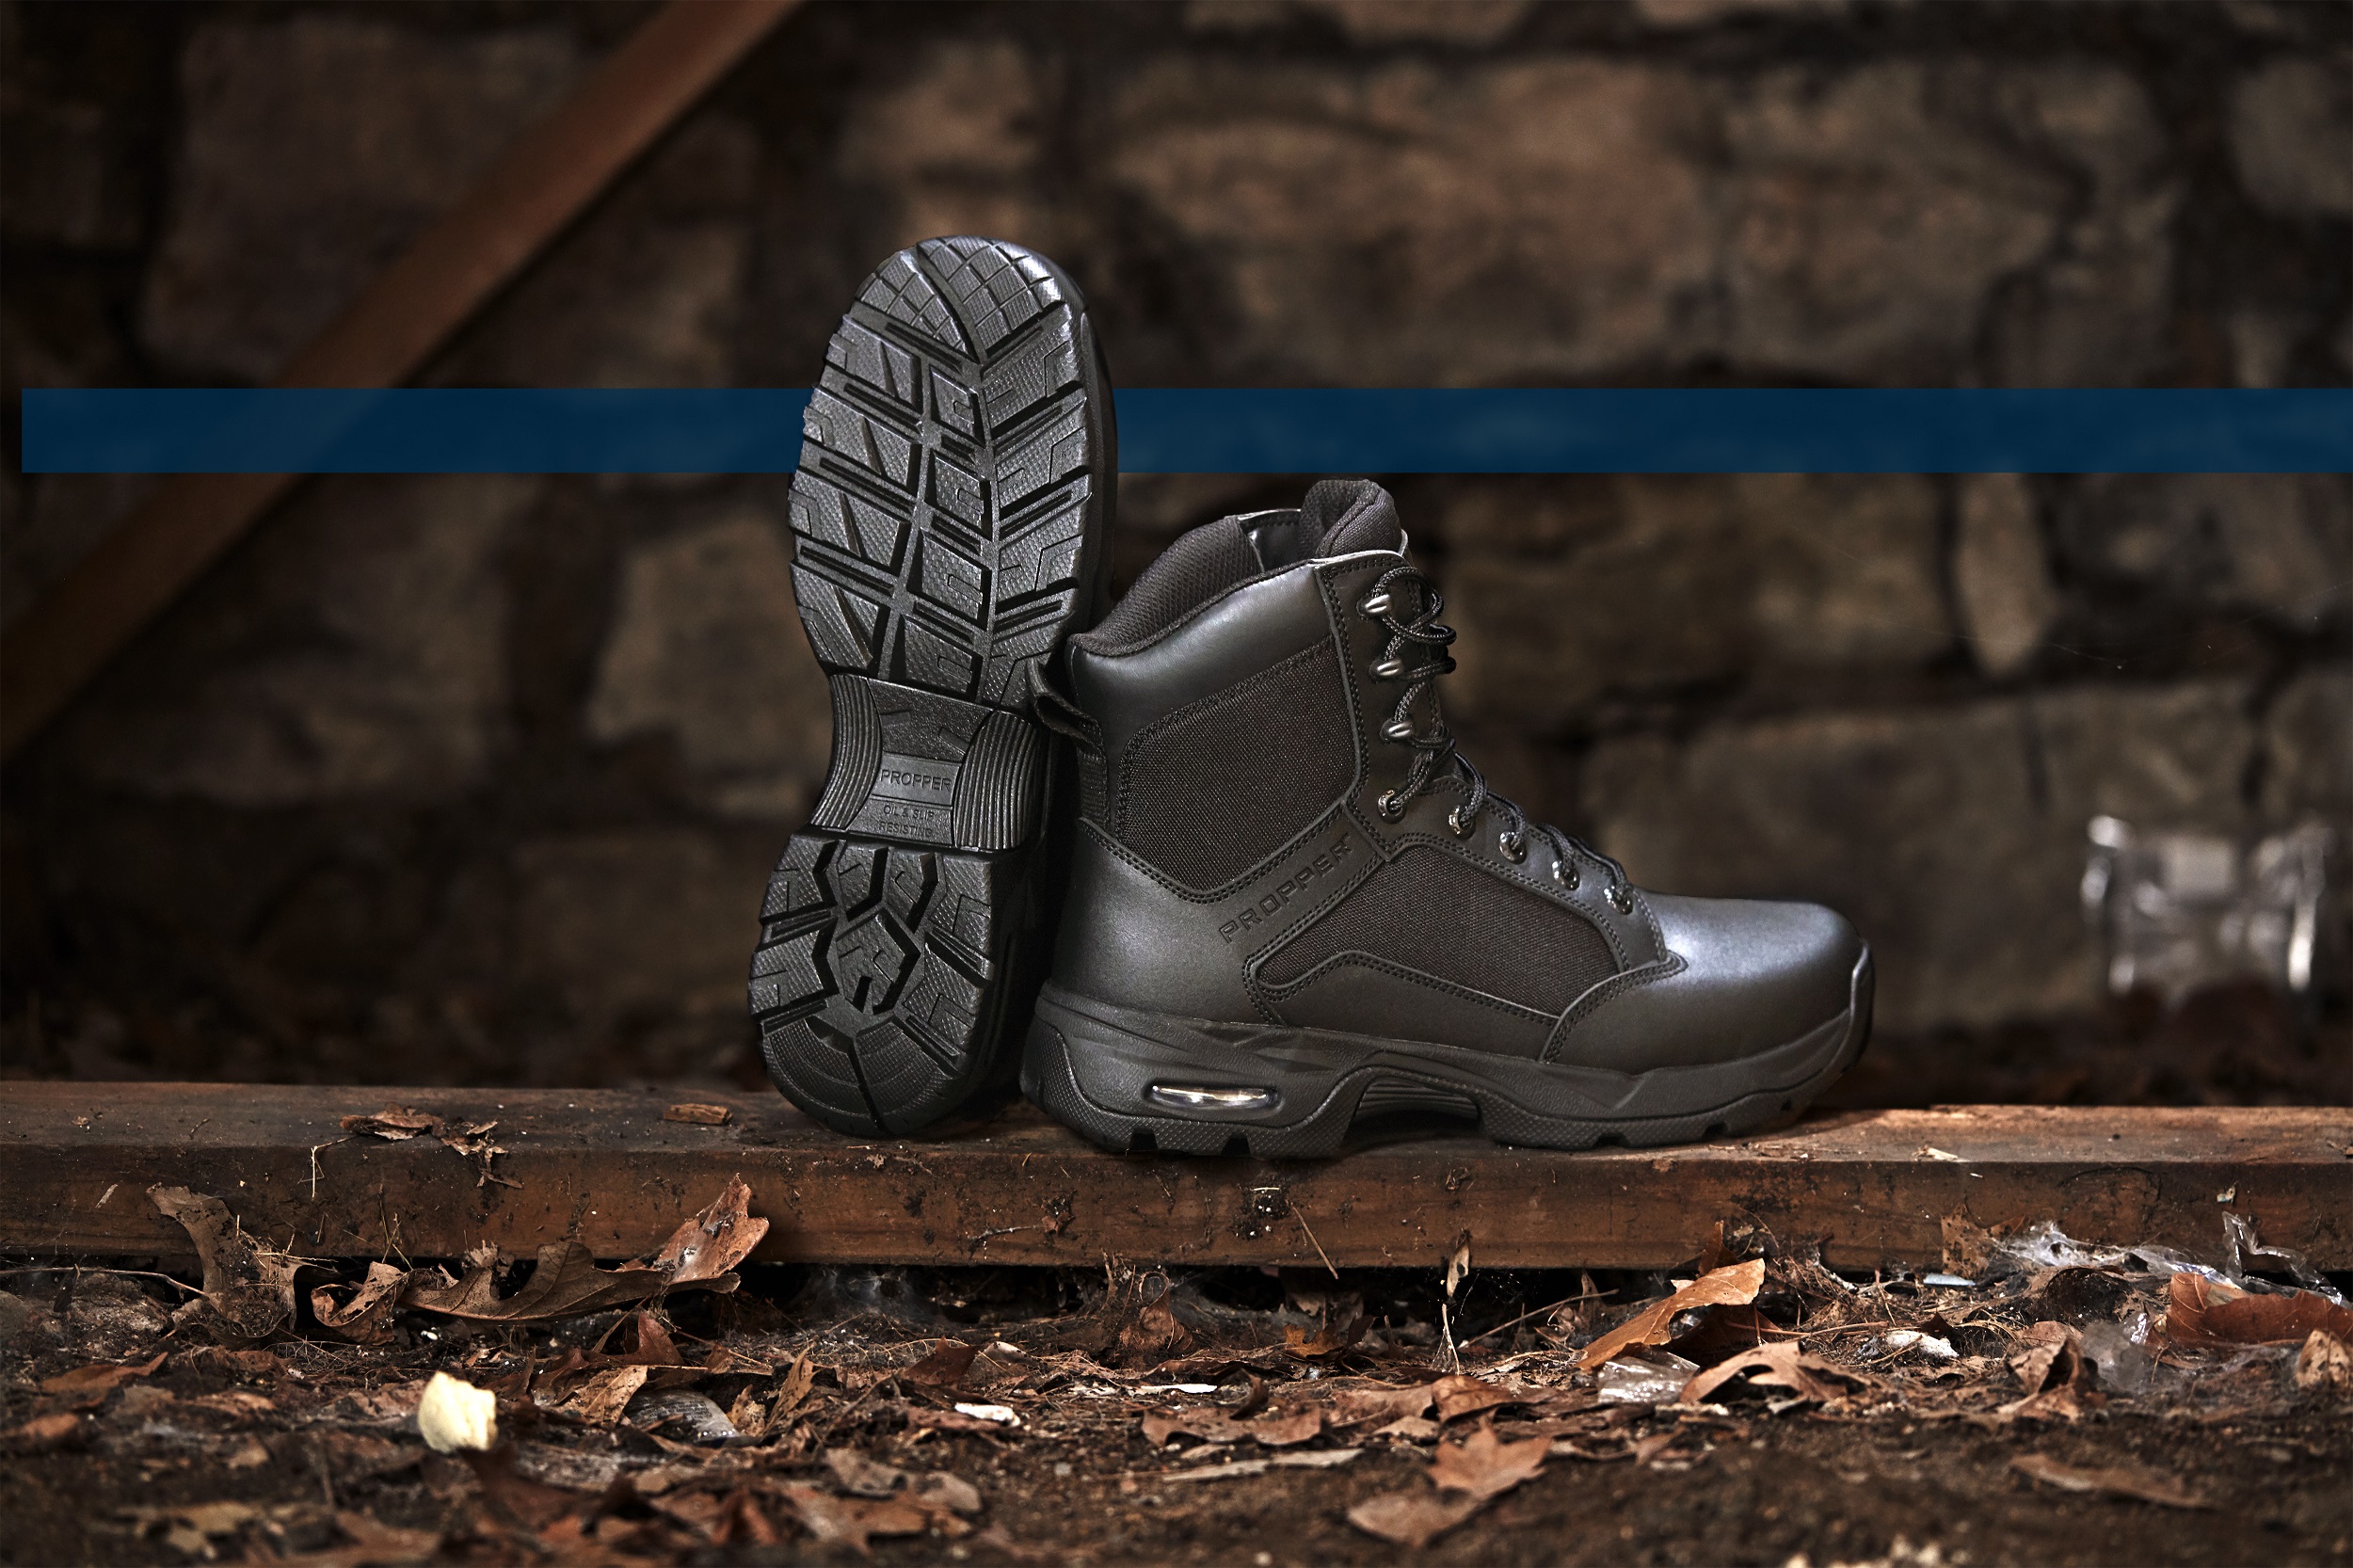 The new Duralight Tactical Boot is built on an EVA rubber outsole for excellent traction and impact absorption.